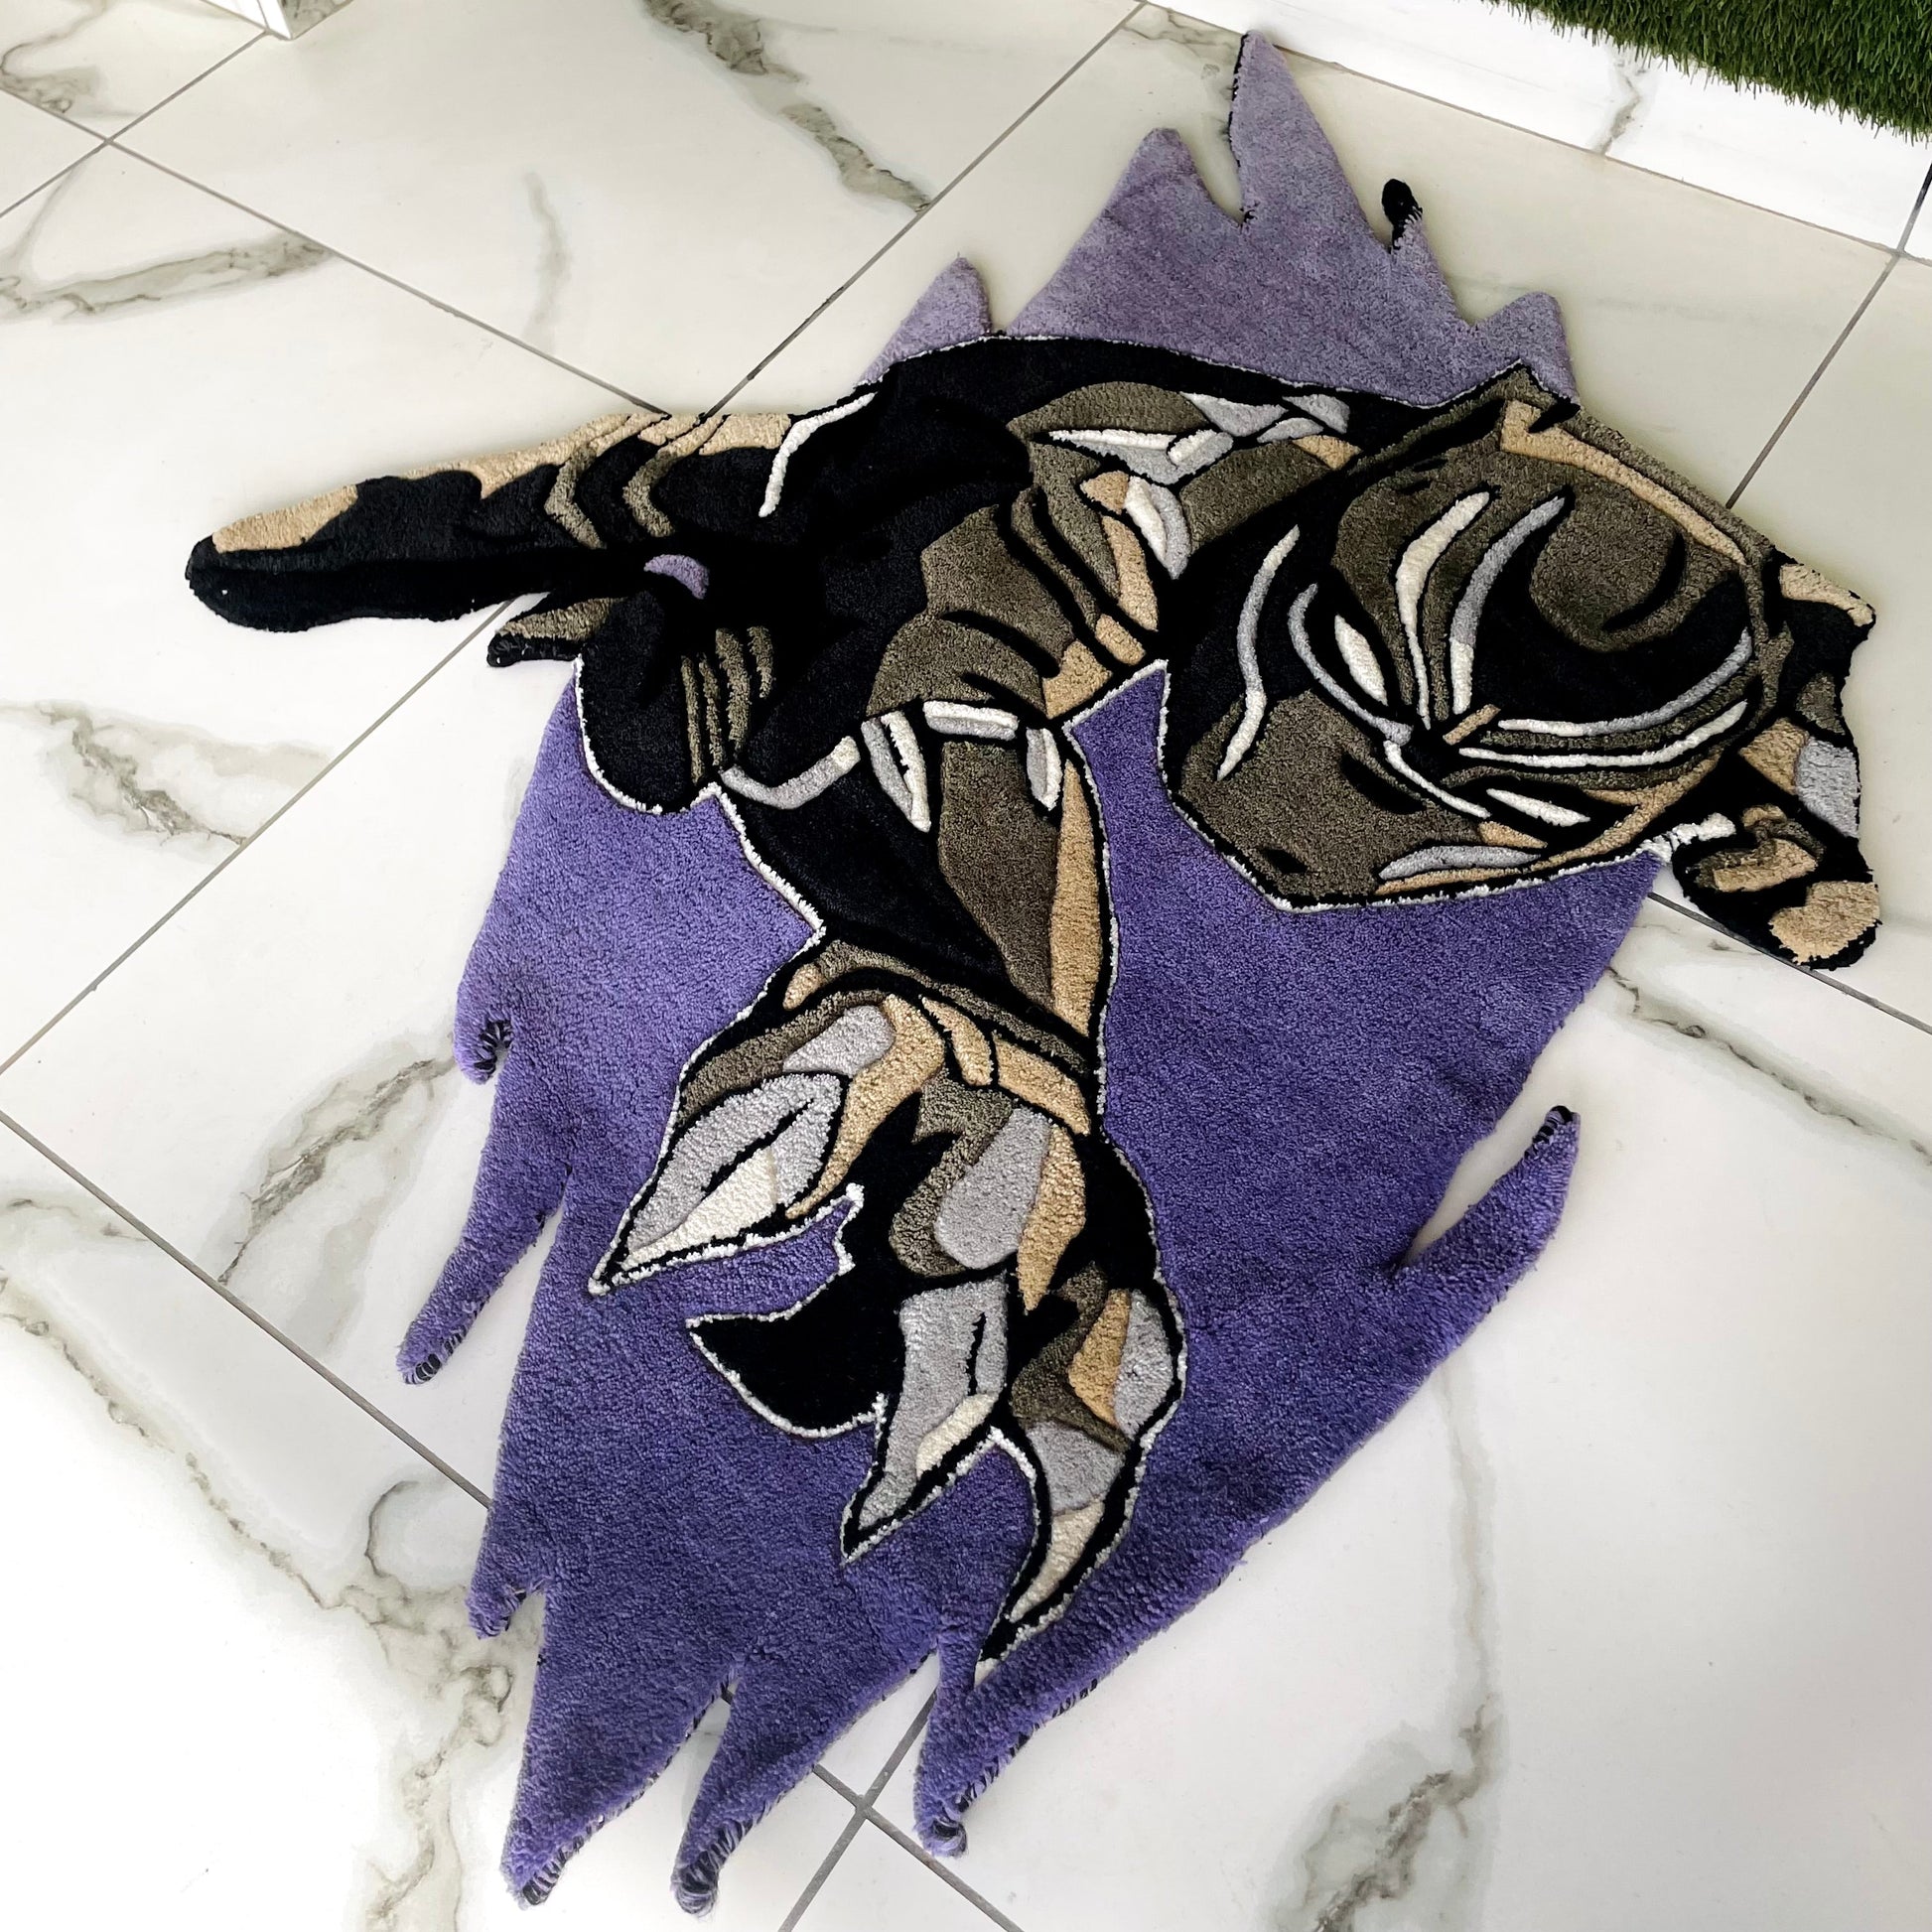 Black Panther Rug side view